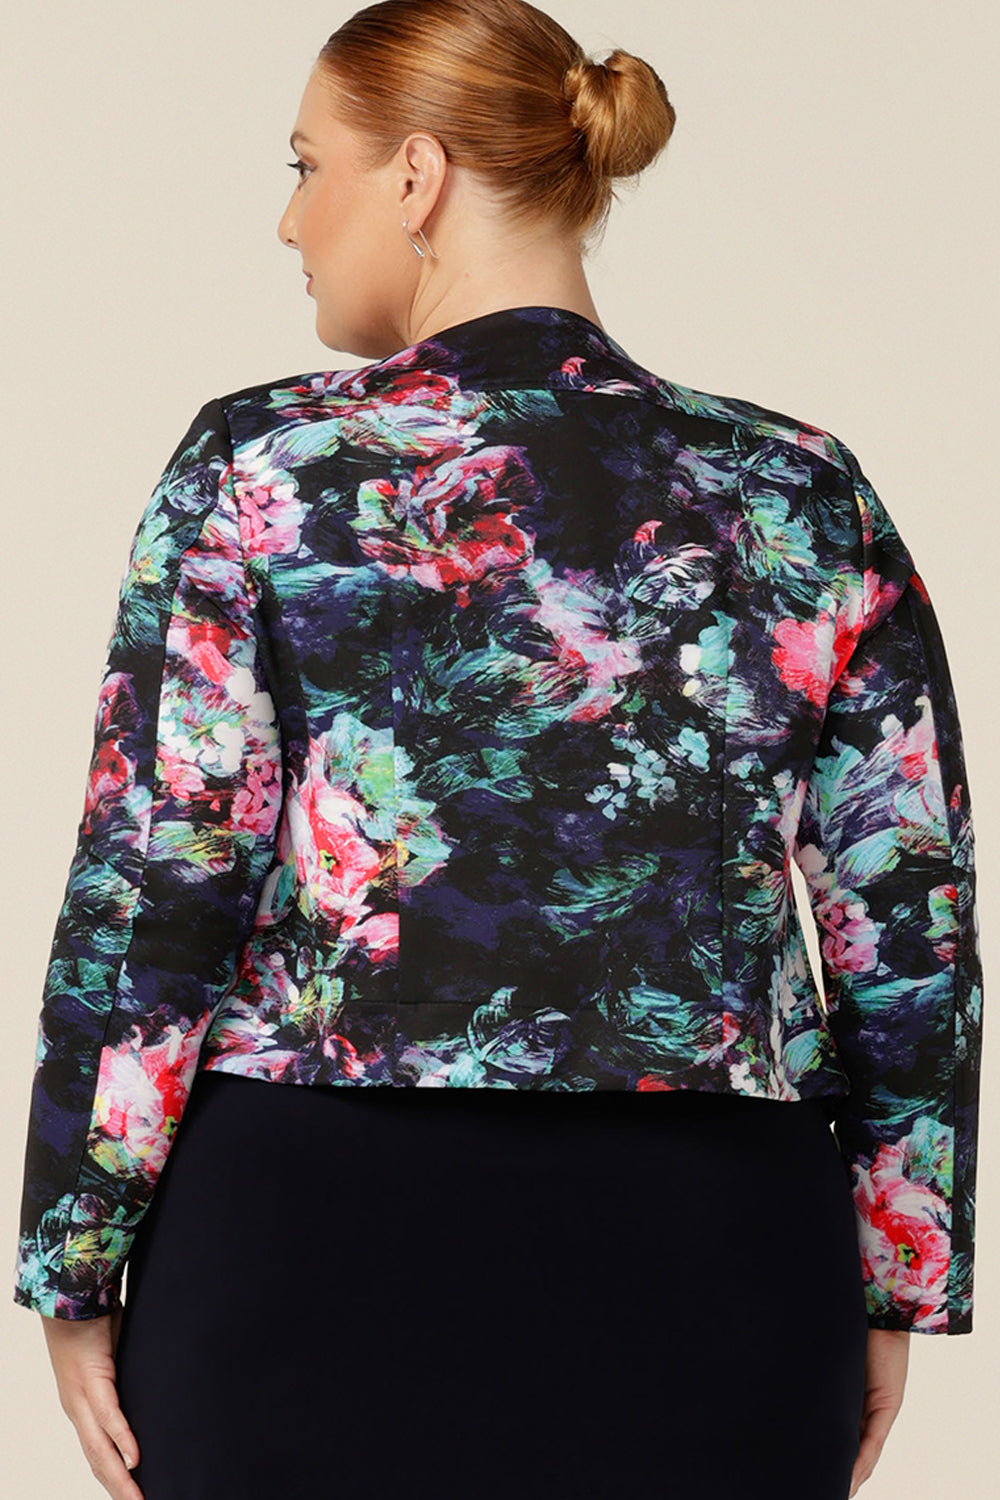 Back view of a collarless, open front jacket in a size 18. A feminine workwear jacket, this soft tailoring jacket comes in printed scuba jersey. Made in Australia for the women of Australia and New Zealand.